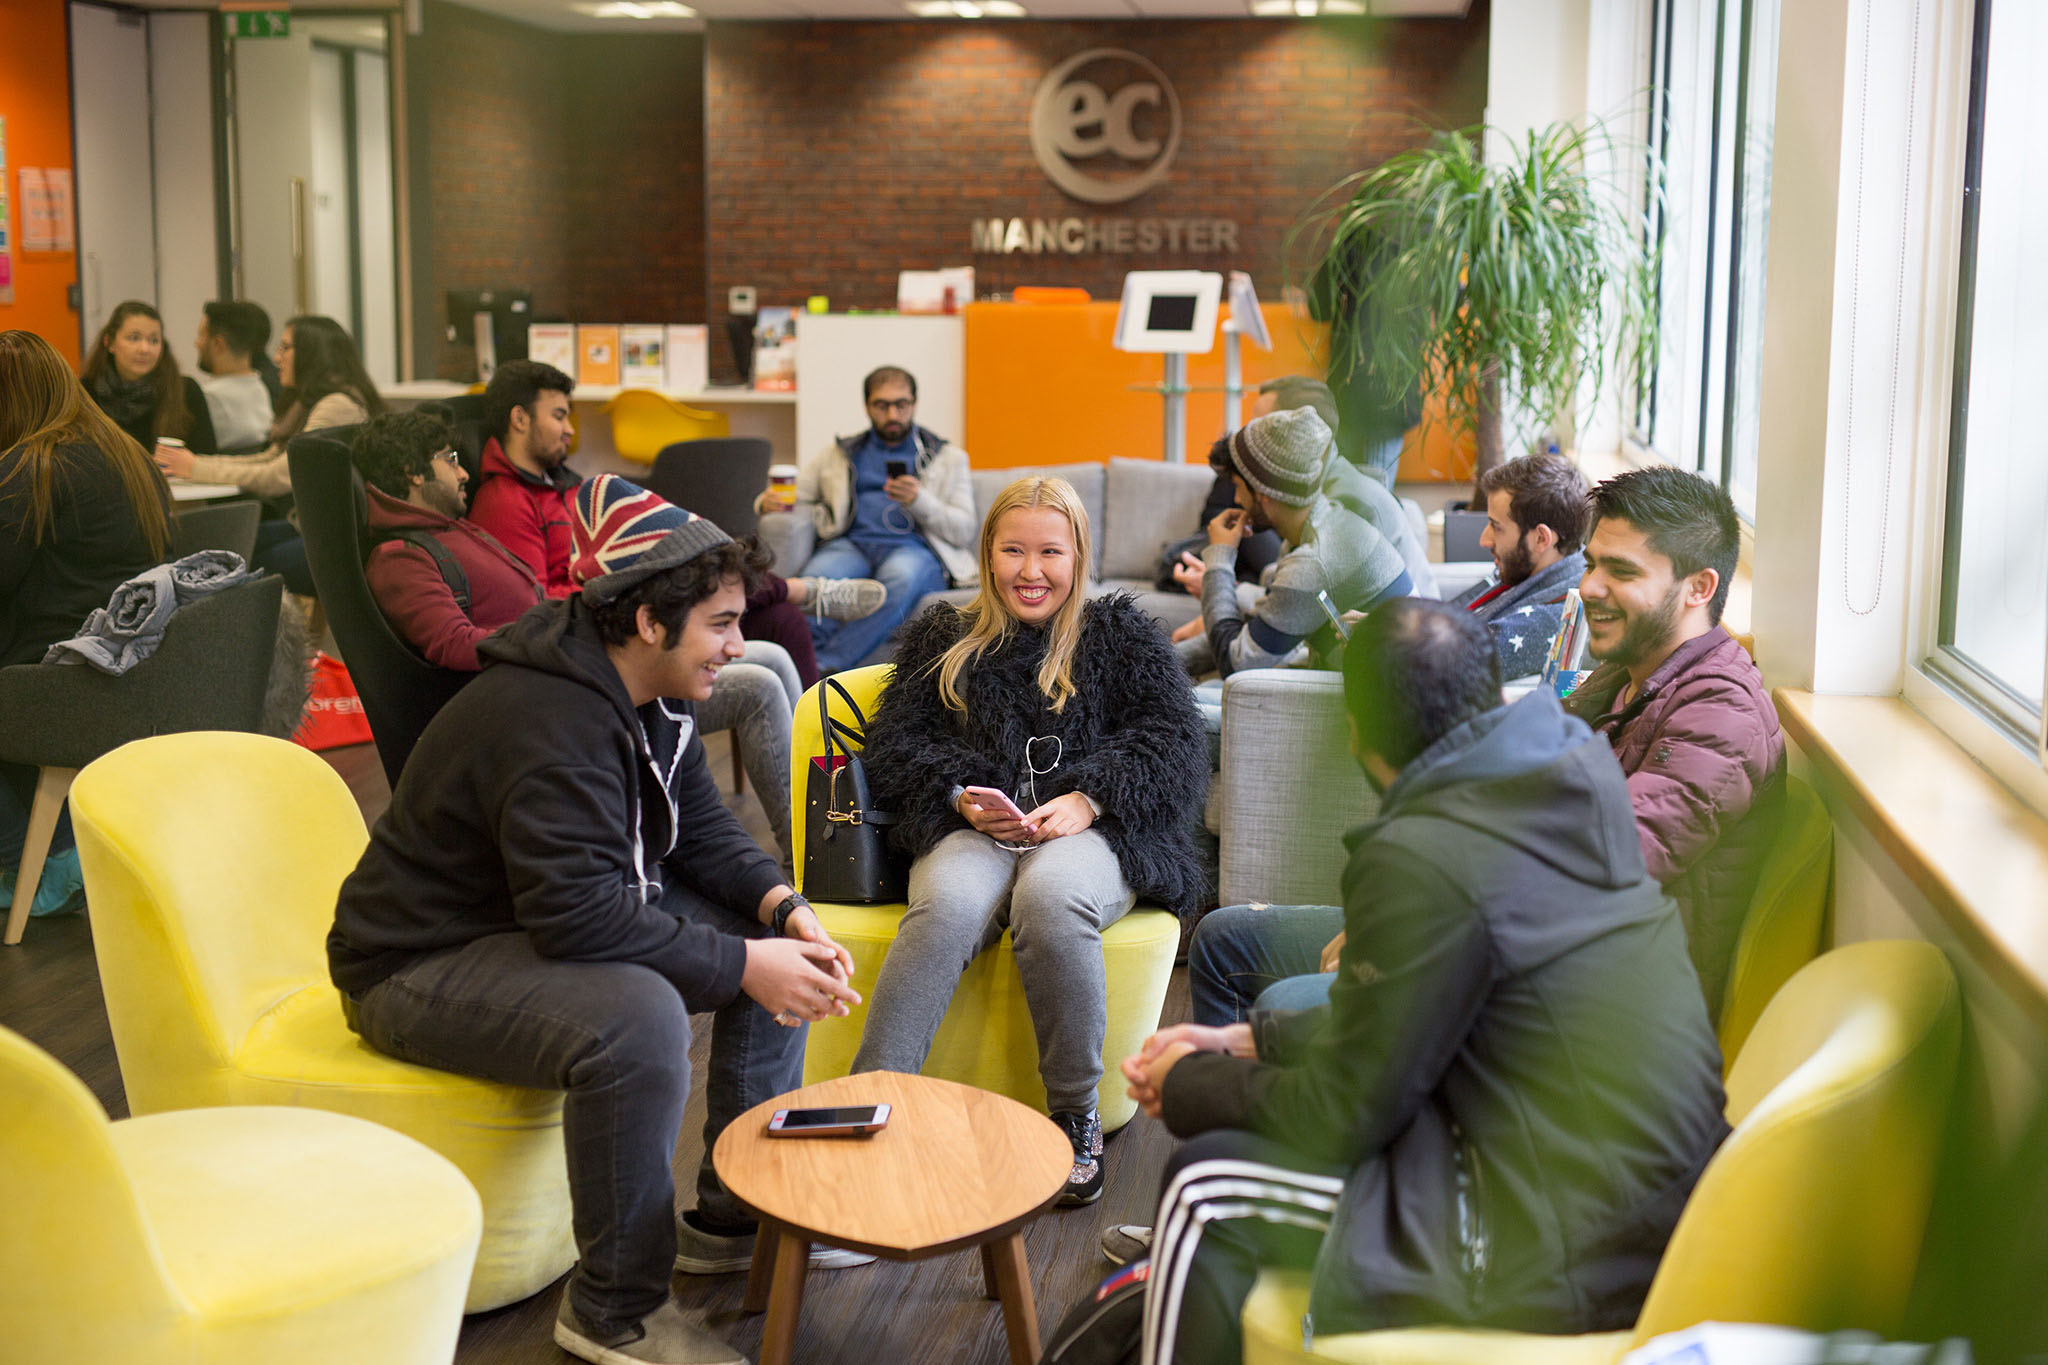 English School in Manchester - EC Language School | ESL. Students Studying and having a good time in EC Manchester Lobby